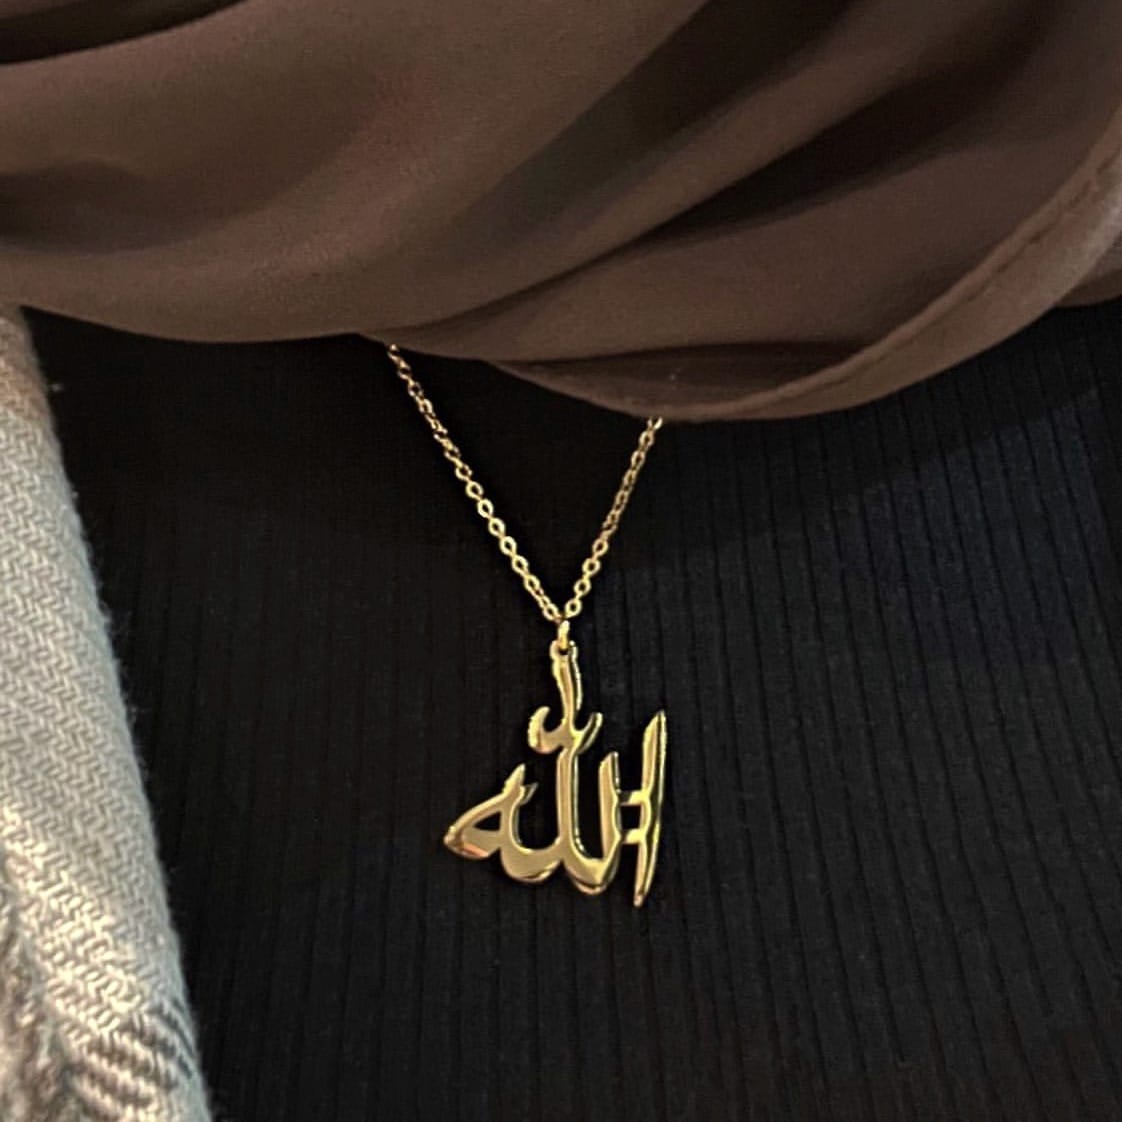 Buy Gold Allah Necklace, 22k Gold Quran Necklace, Allah Pendant, Islamic  Jewelry, Sterling Silver Teardrop Online in India - Etsy